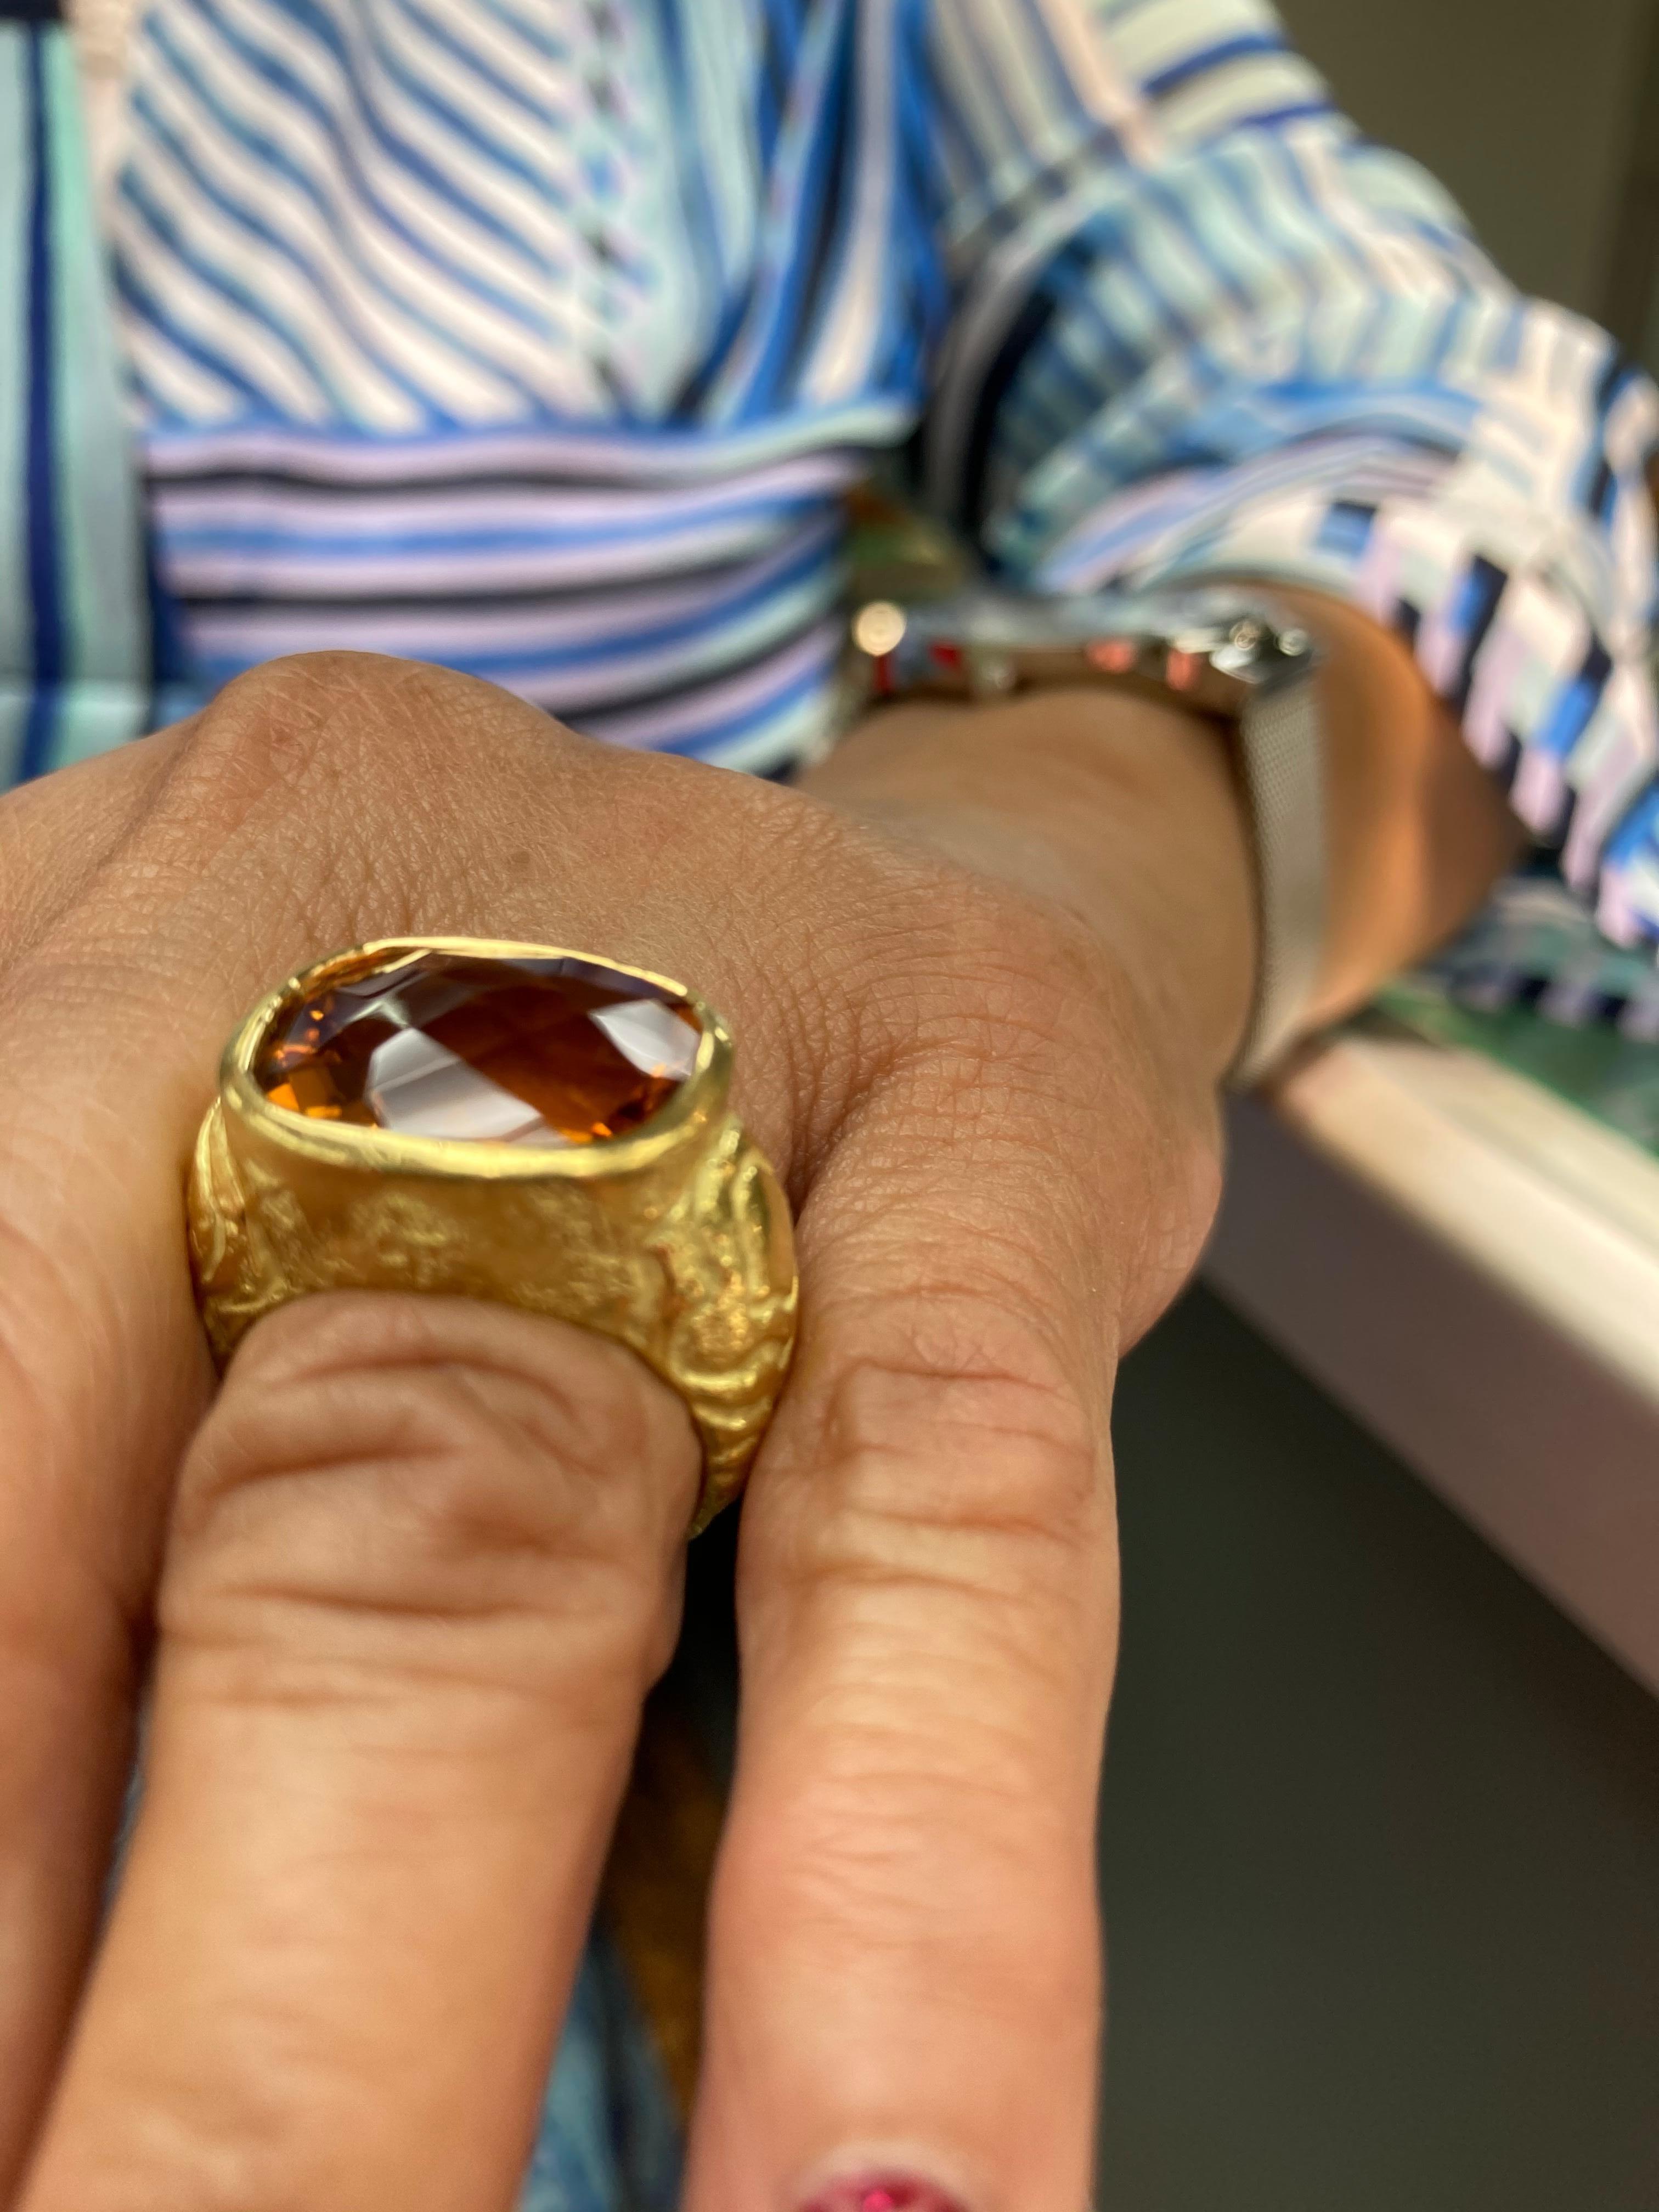 Cushion Cut Citrine Yellow Gold Ring For Sale